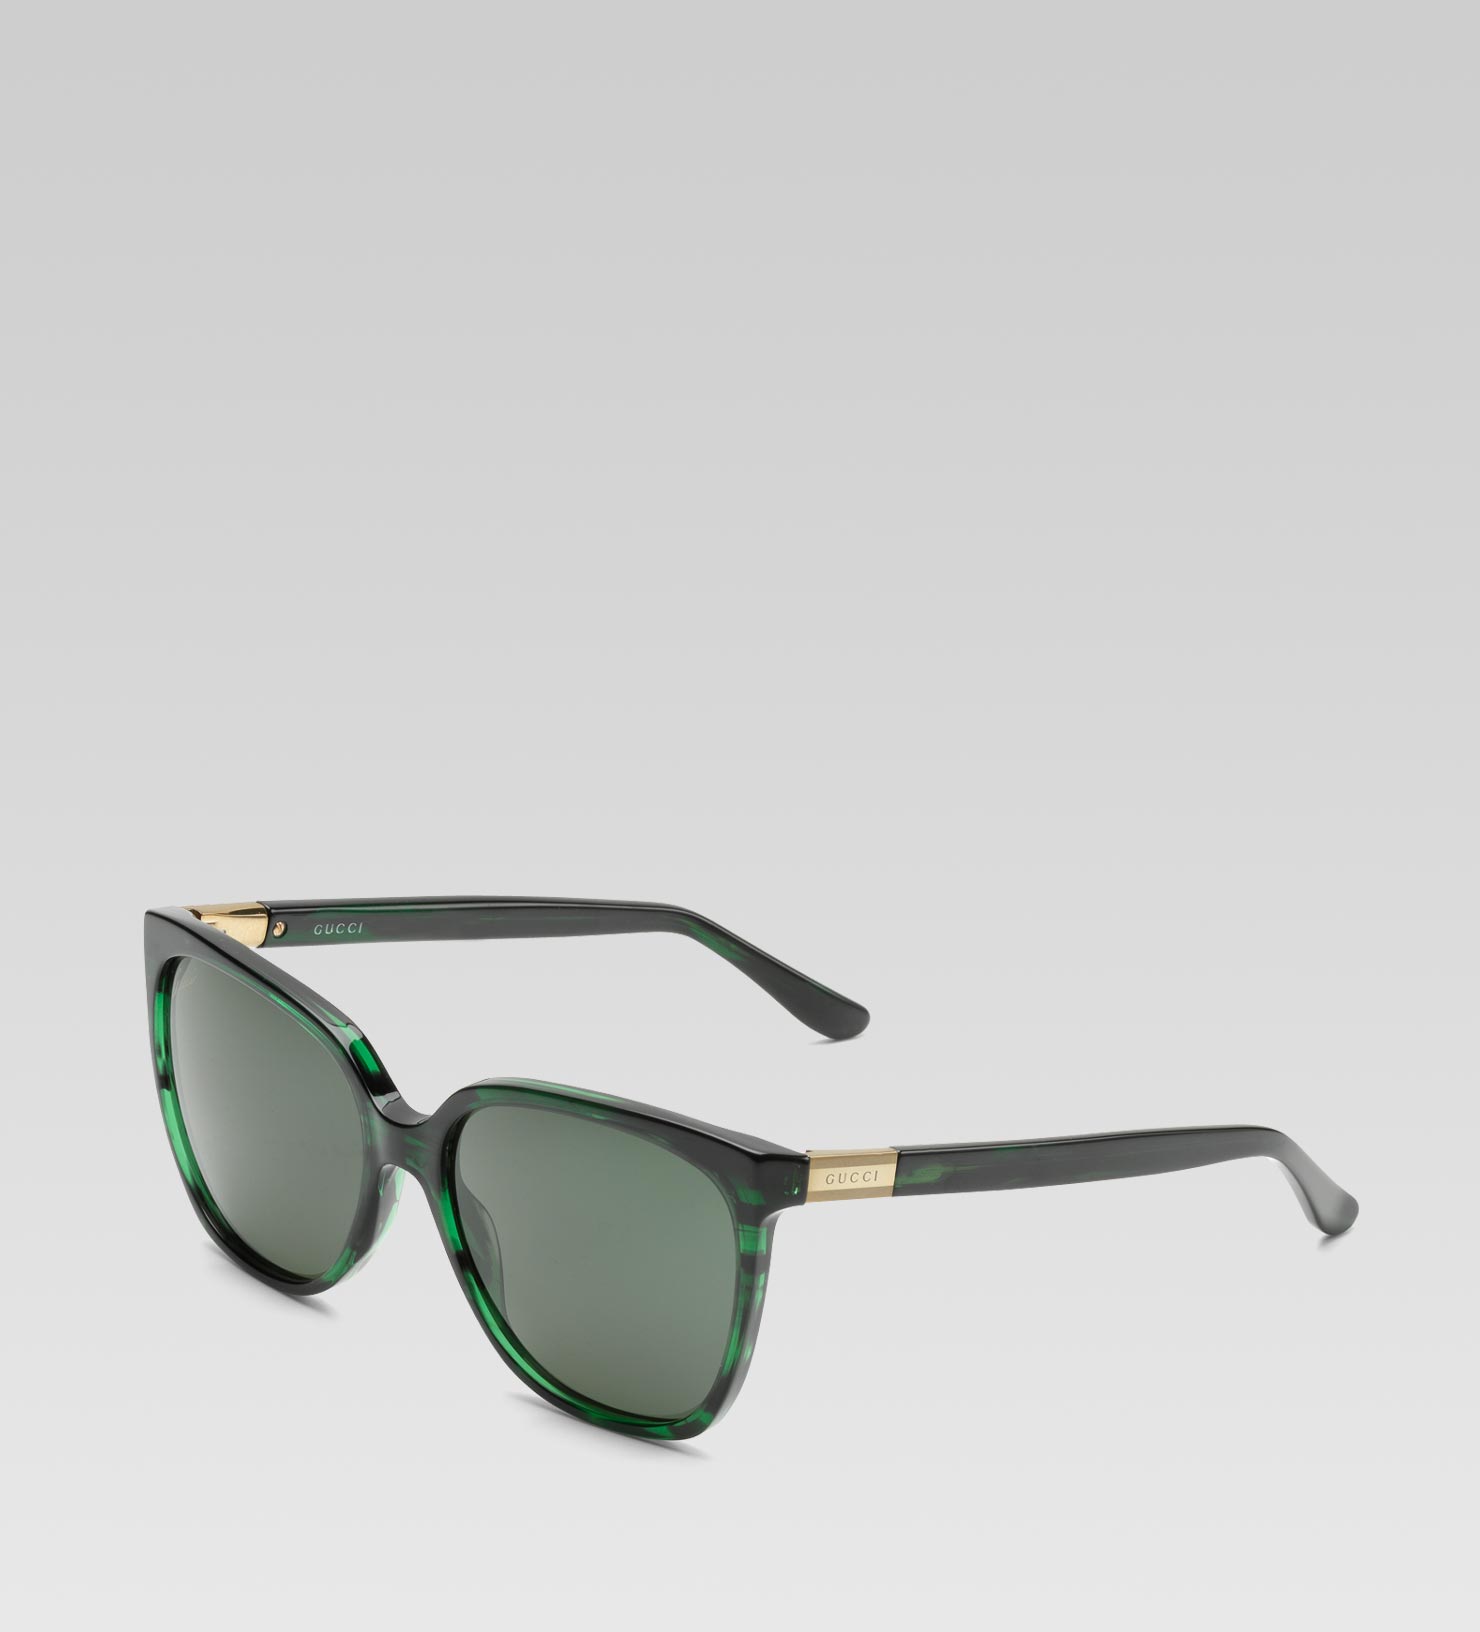 gucci sunglasses green frame Shop Clothing & Shoes Online